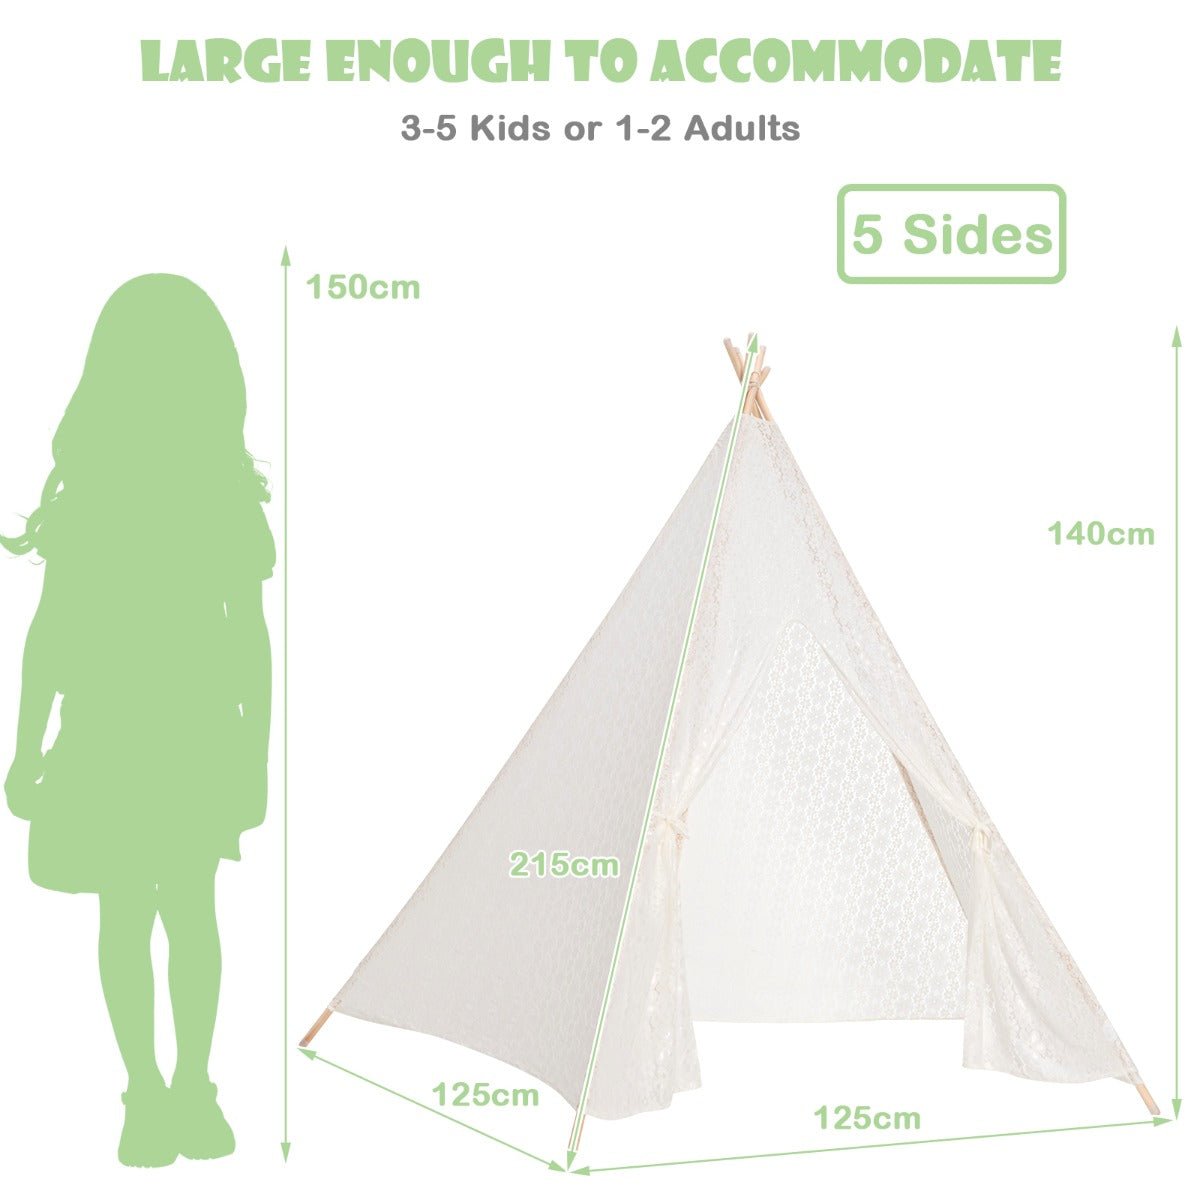 All-Ages Retreat: 5-Side Lace Teepee Tent with Enchanting colourful Lights